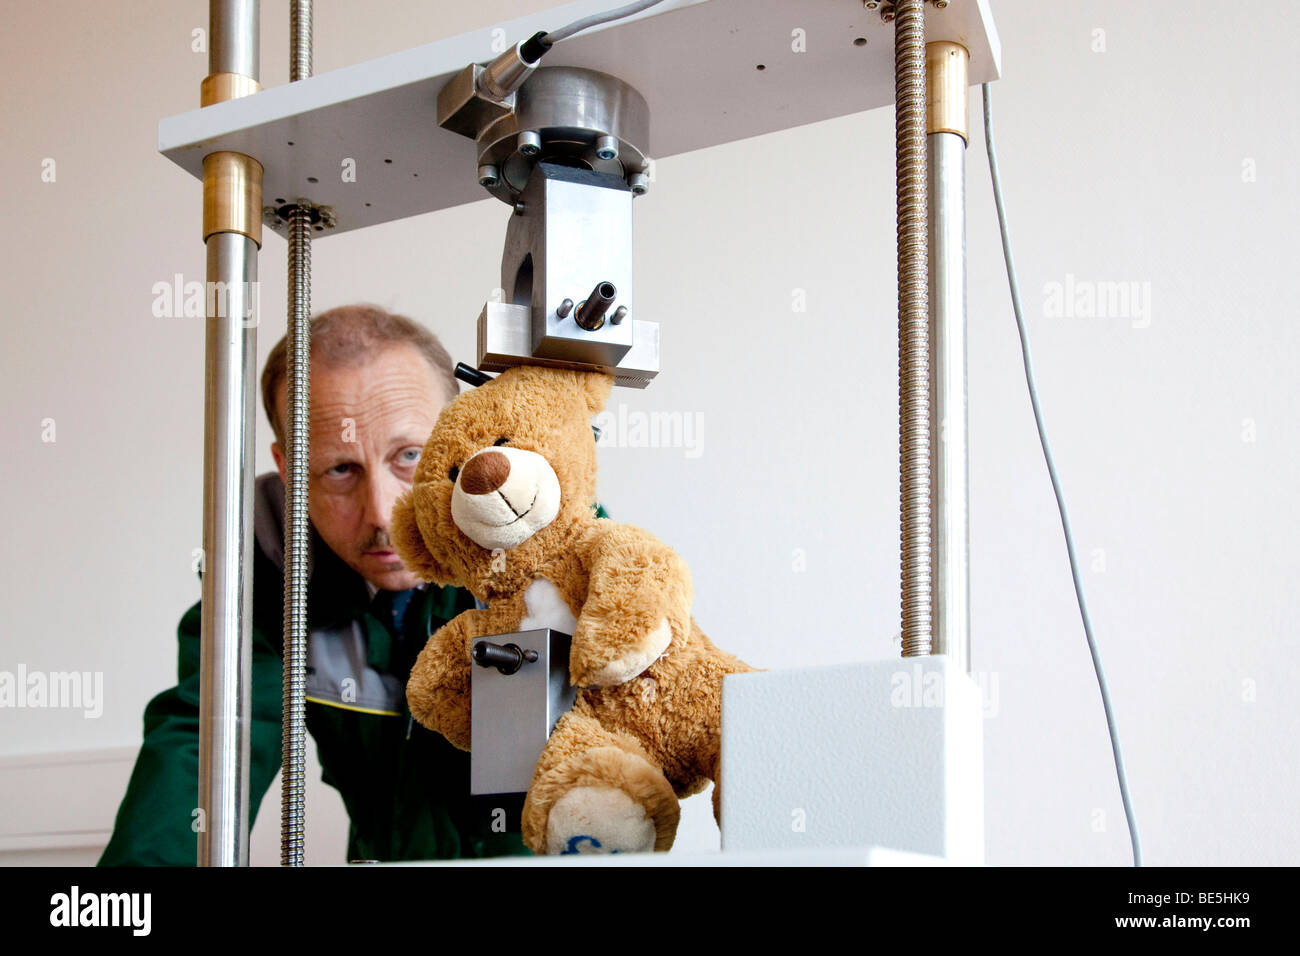 Testing of the strength of seams on a teddy bear, for the GS-certification mark, testing safety, in a testing laboratory of the Stock Photo